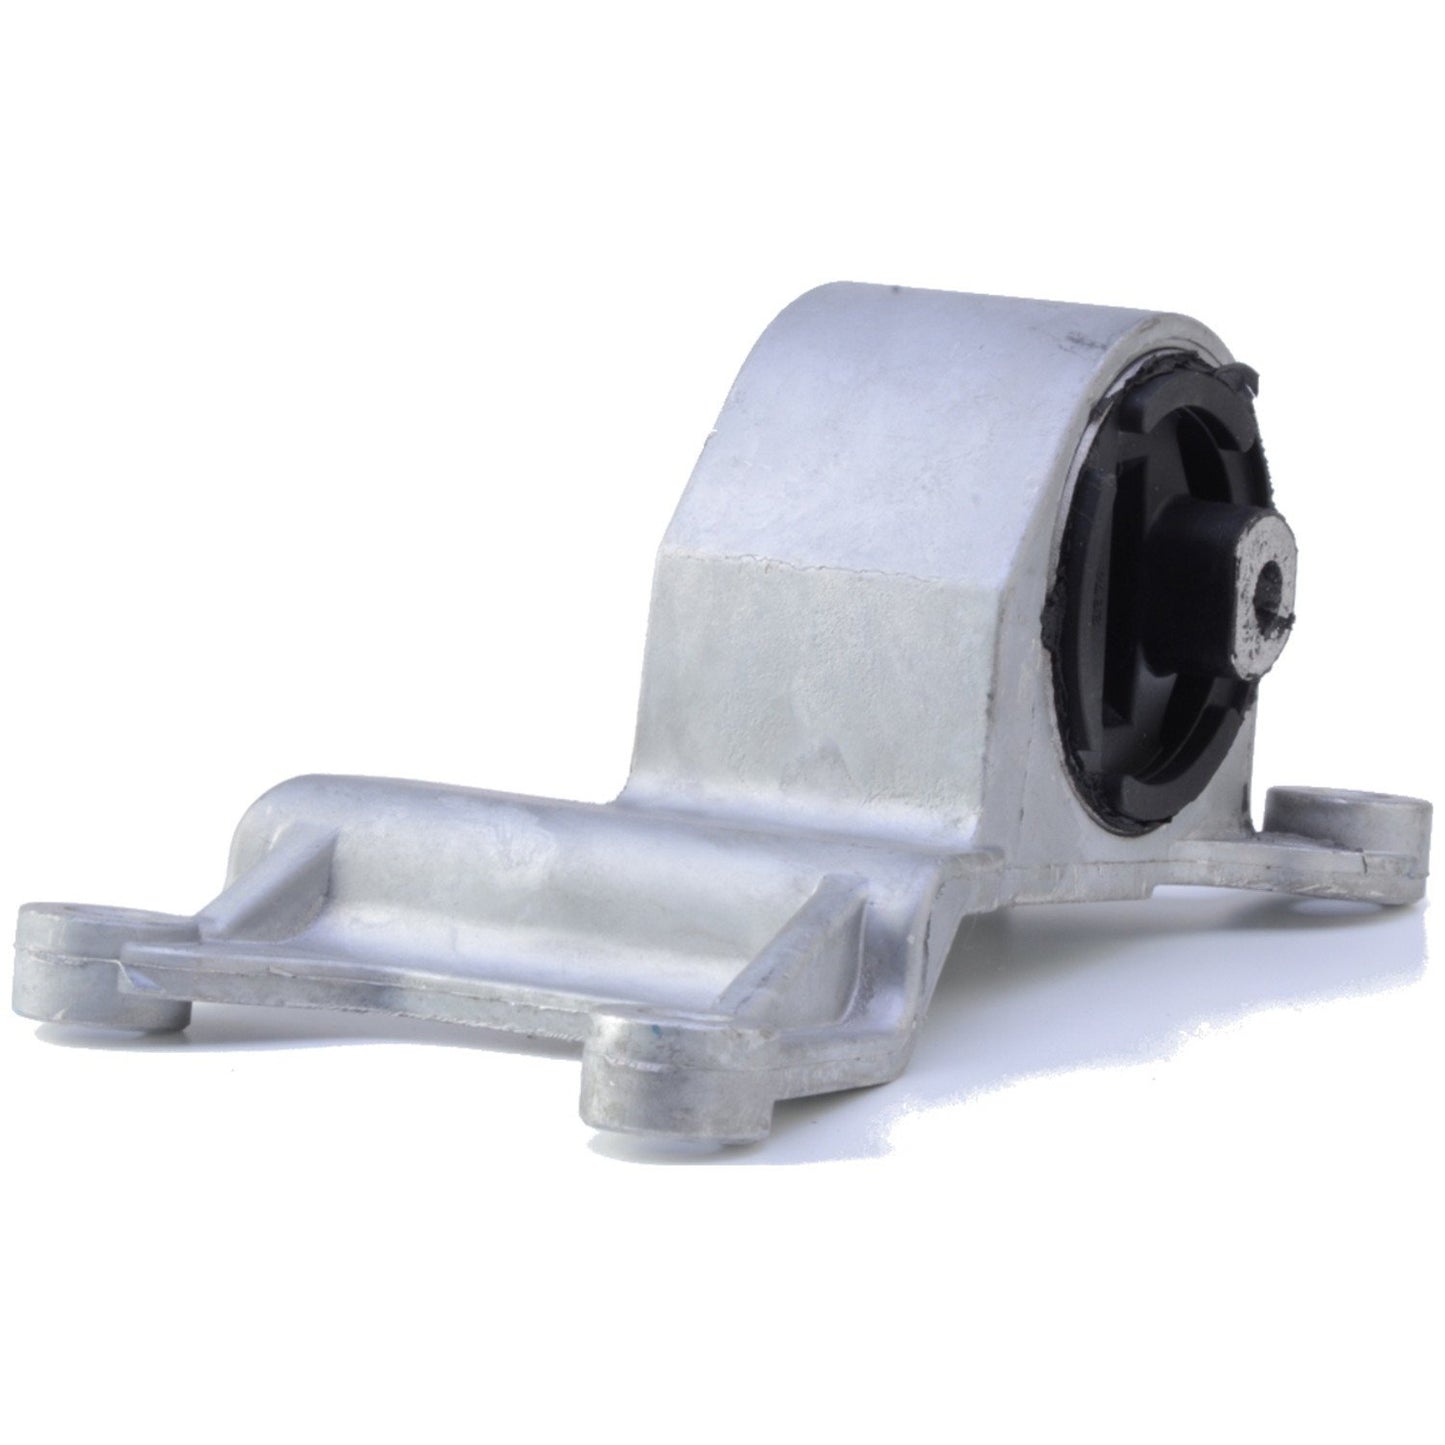 Front View of Left Automatic Transmission Mount ANCHOR 2874